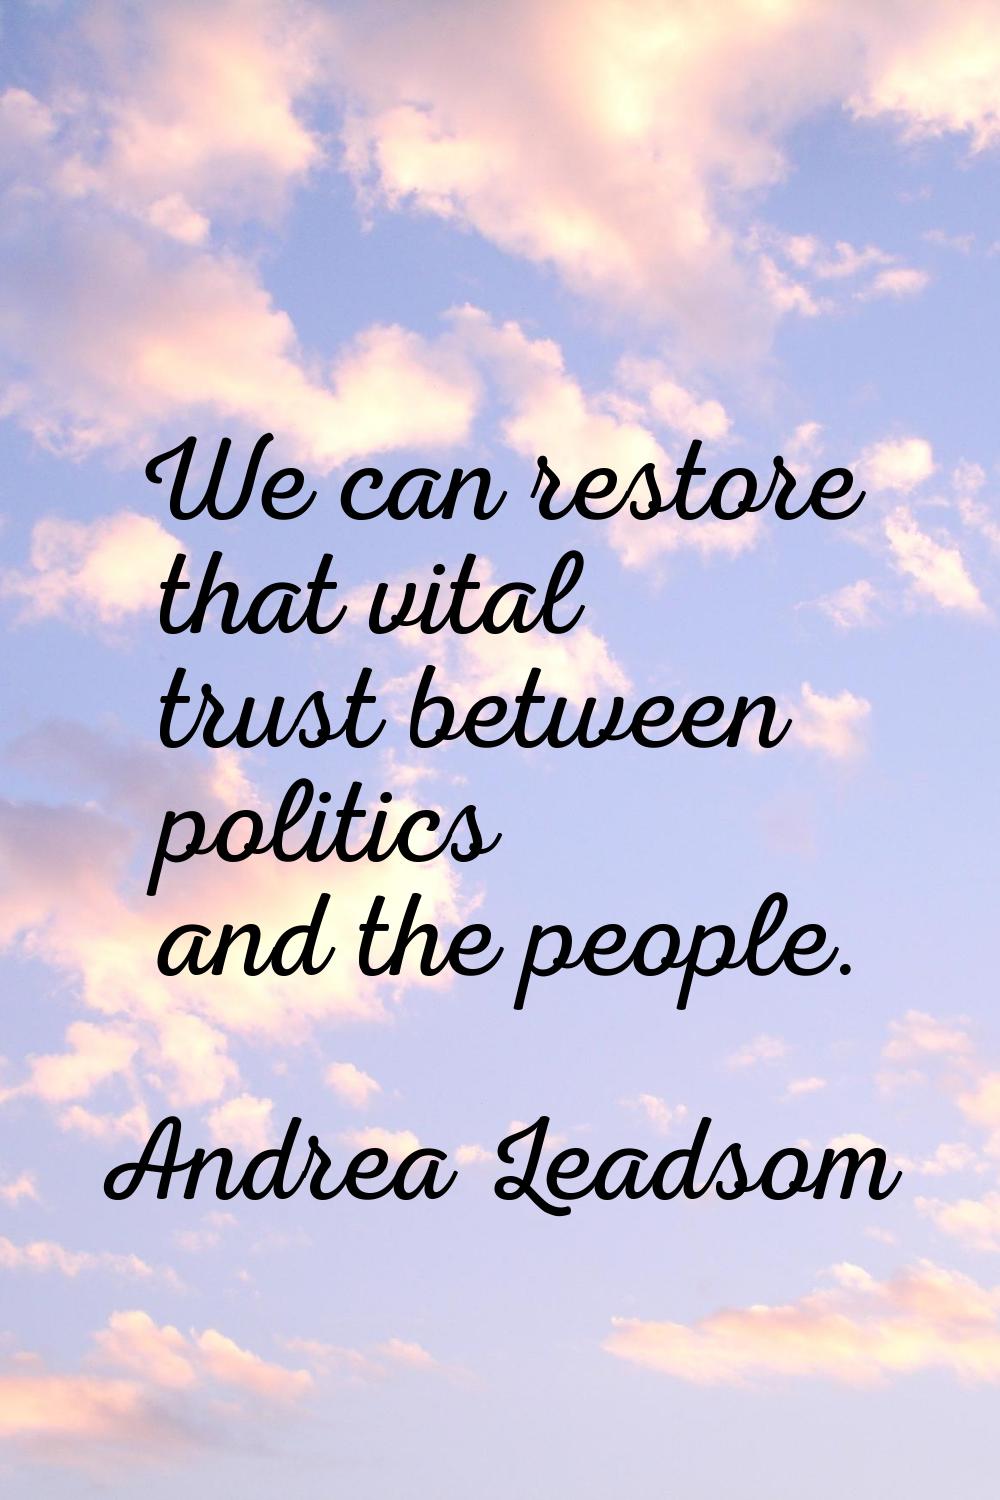 We can restore that vital trust between politics and the people.